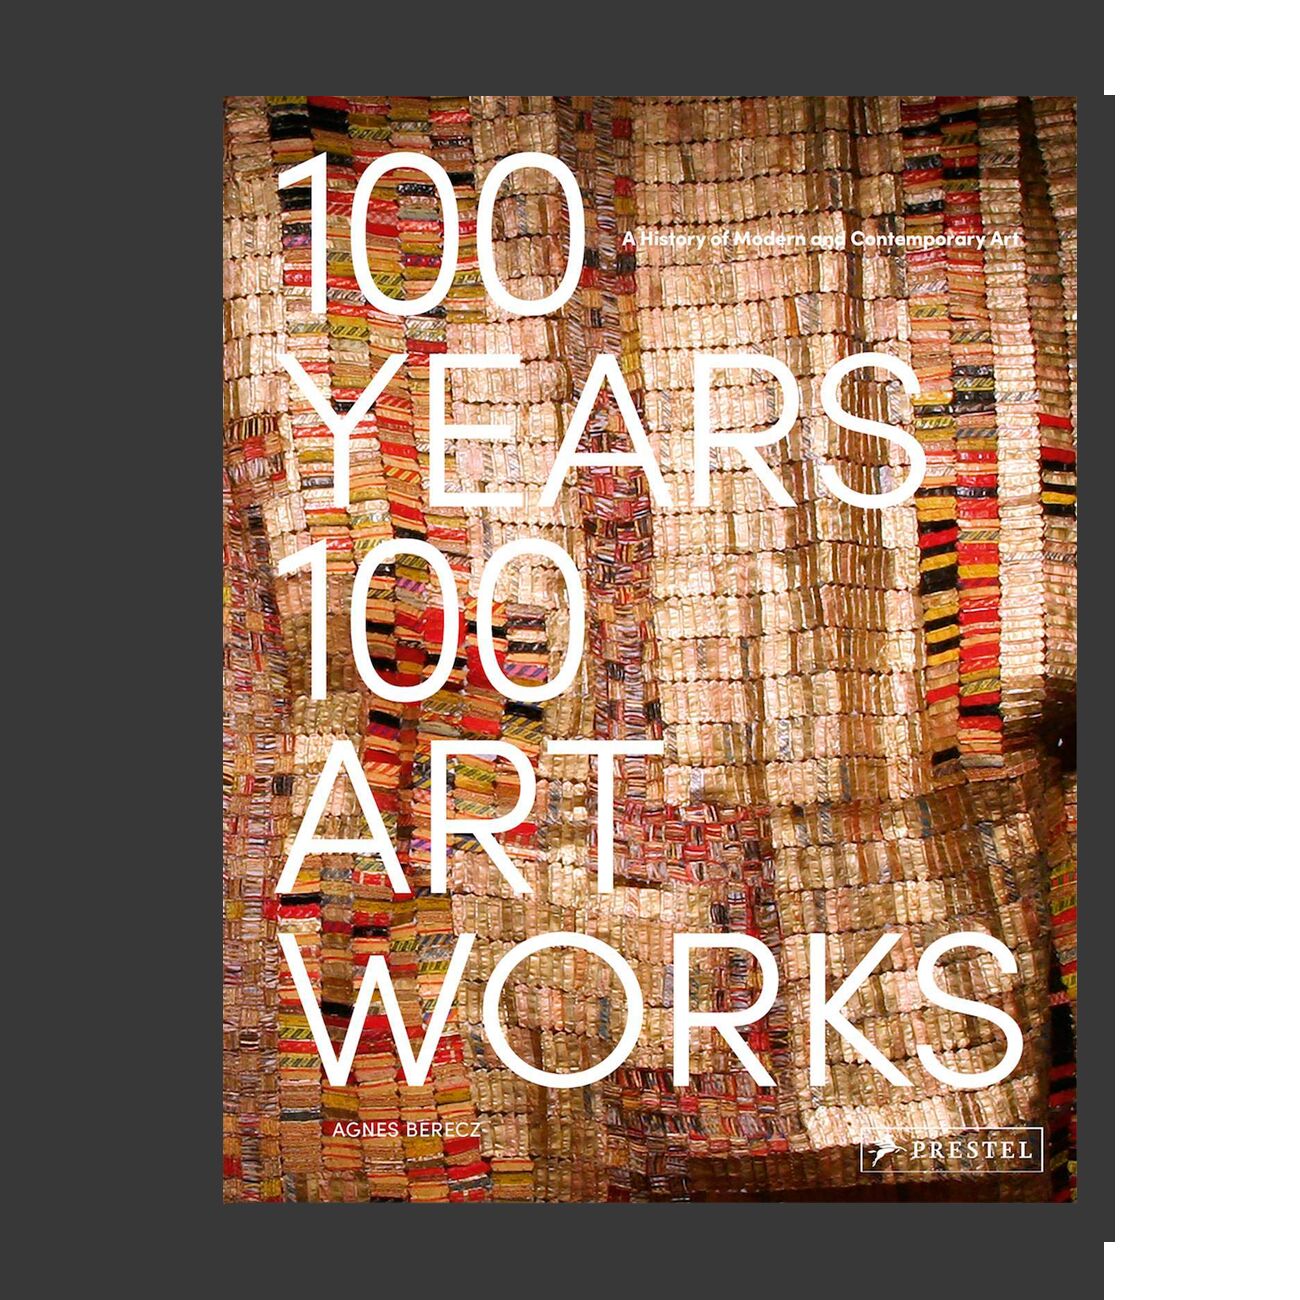 100 Years, 100 Artworks: A History of Modern and Contemporary Art